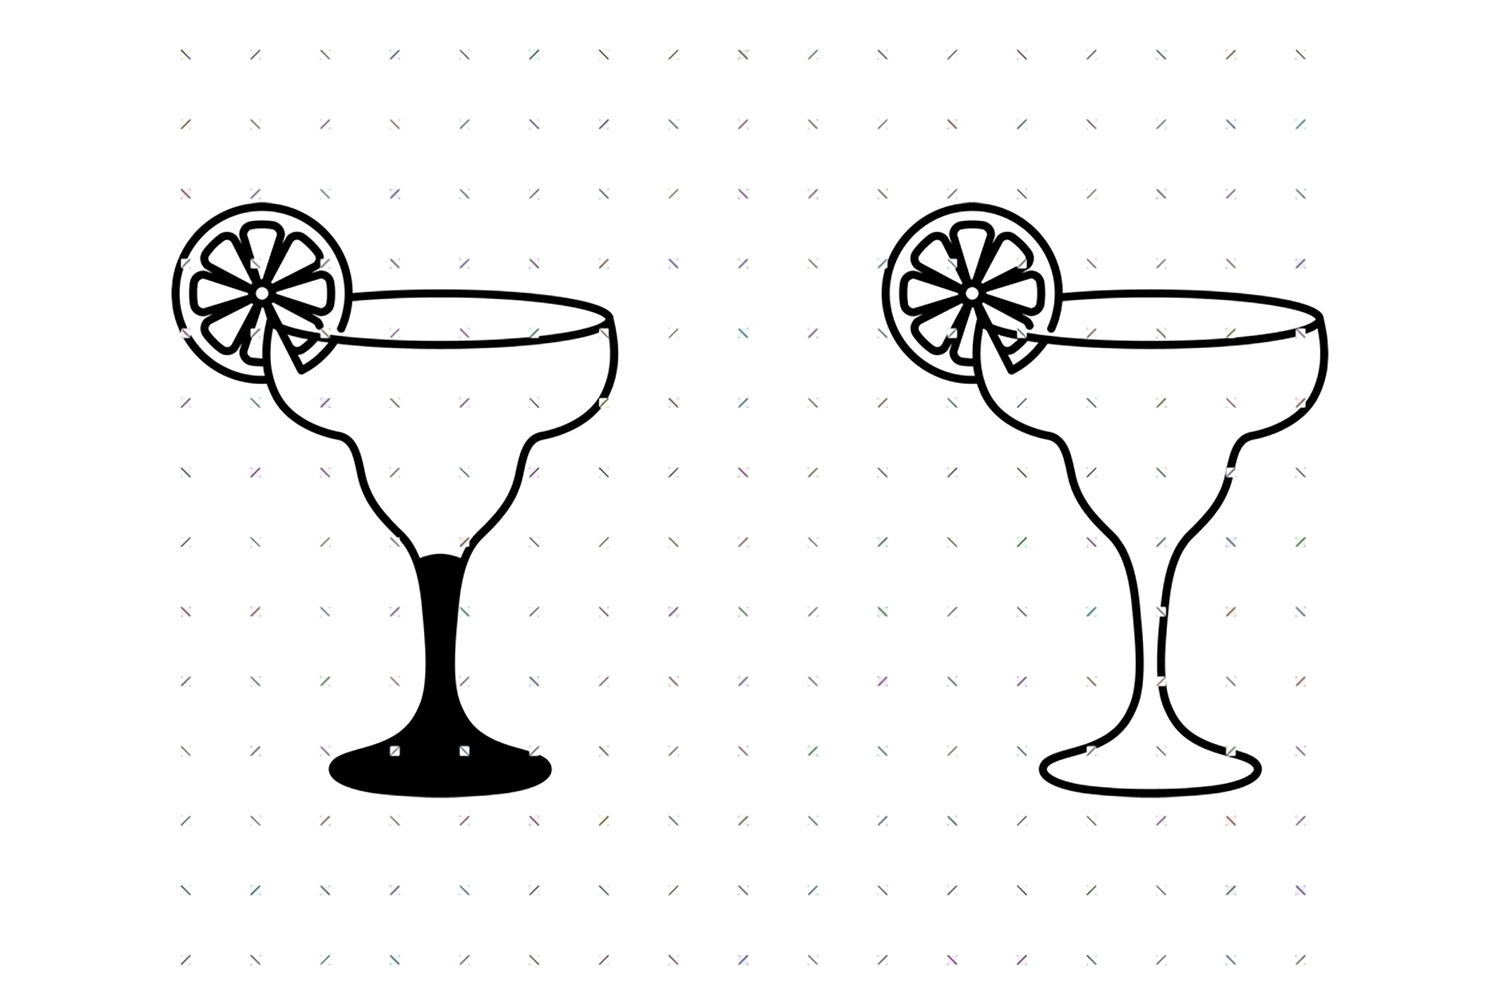 Martini Glass Svg, Cocktail Glass Clipart, Cut File for Cricut, Silhouette  Cut Files, Instant Download, Digital Download -  Denmark